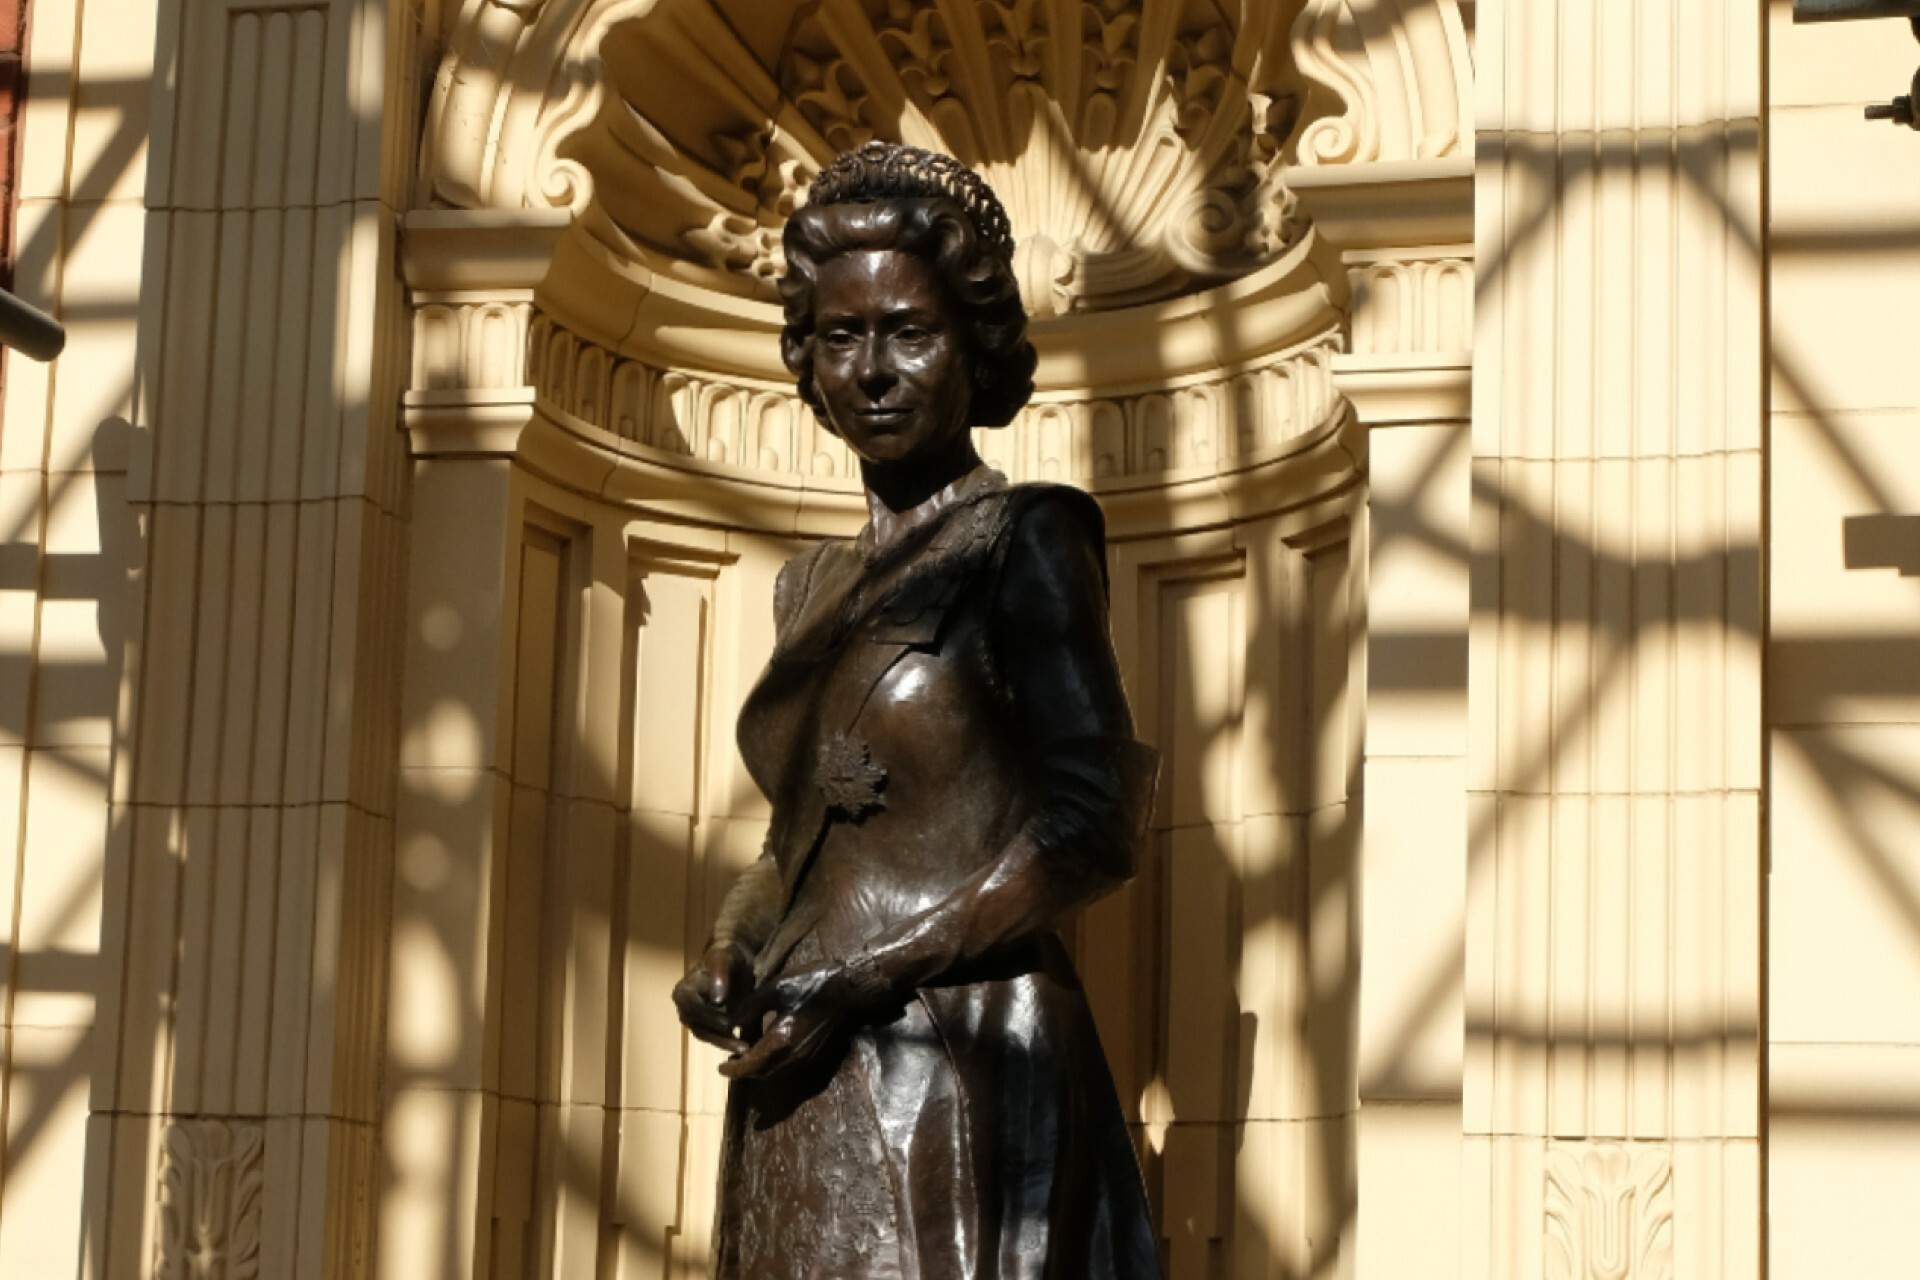 a-brand-new-statue-of-queen-elizabeth-ii-has-been-revealed-at-the-royal-albert-hall